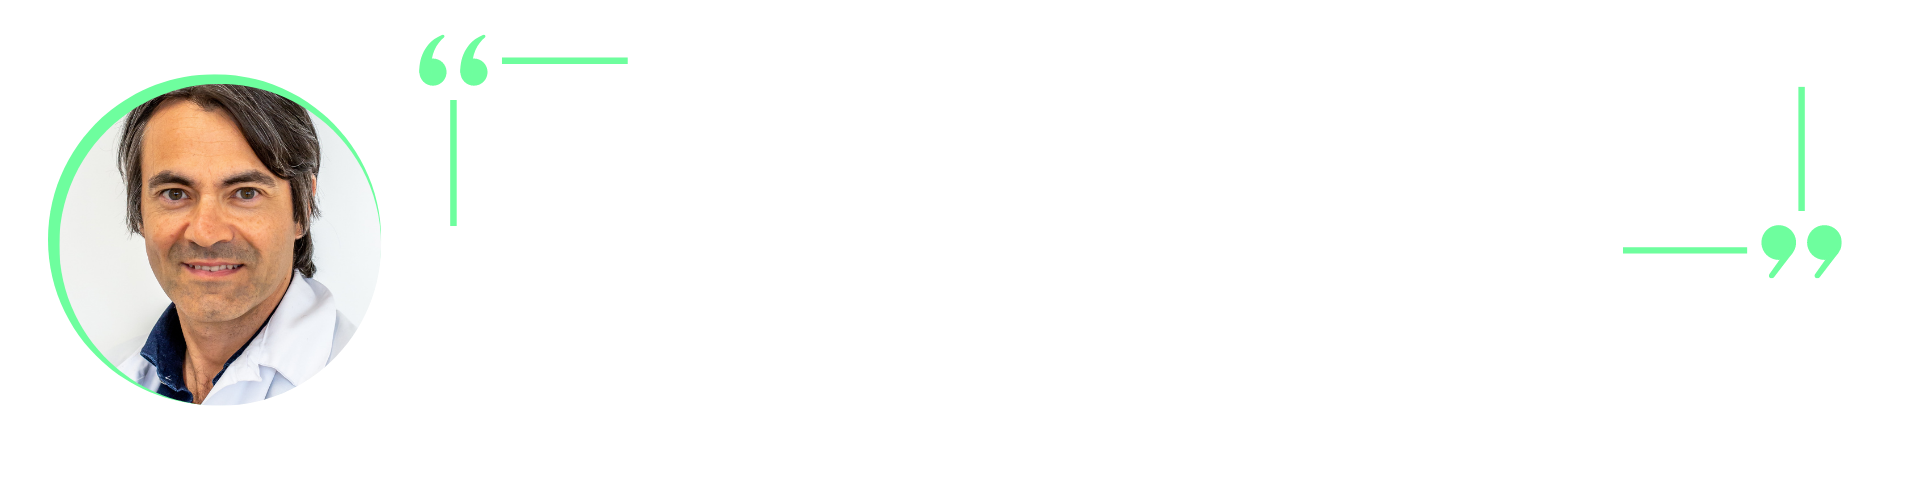 Doctor Paolo Machi's quotation: " We don't want to have a perfect treatment. We just have to save the patient [...] then we will come back probably in two or three weeks for a most definitive treatment"